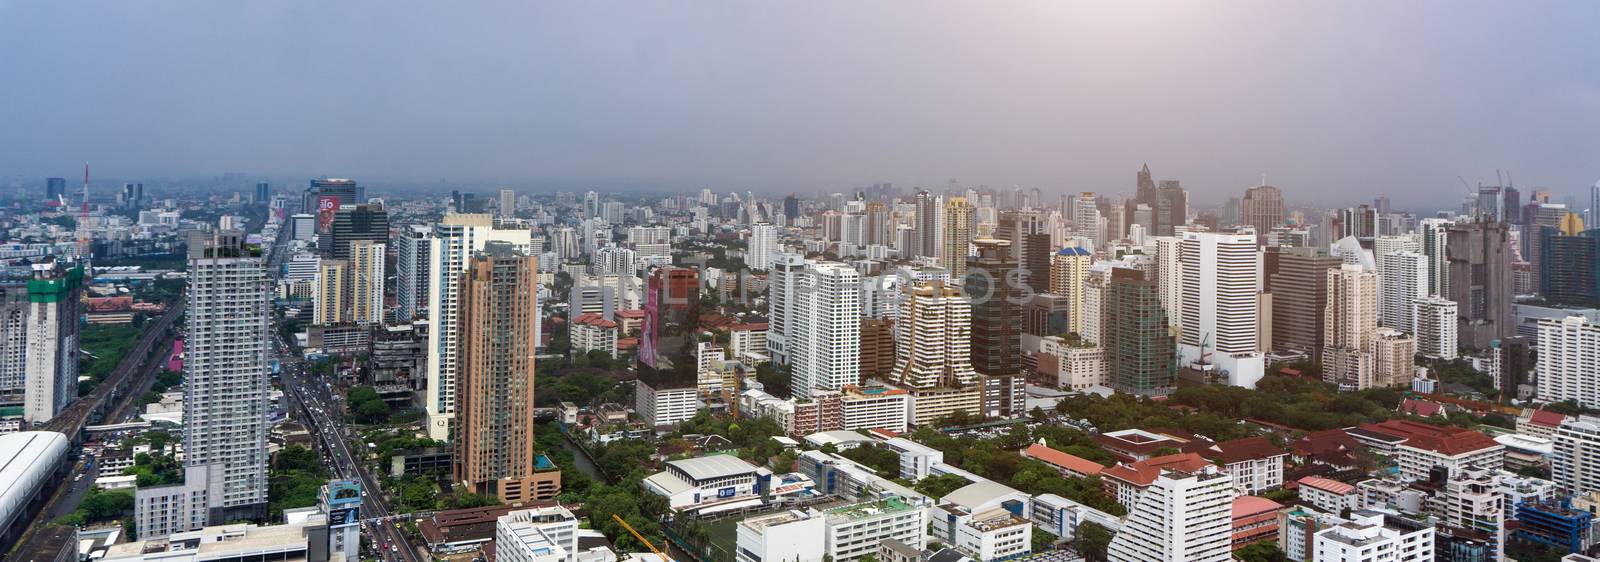 BANGKOK, THAILAND - May 19, 2017 panorama view of bangkok city and modern office buildings in Aerial view, Bangkok is the capital and most populous city of Thailand.